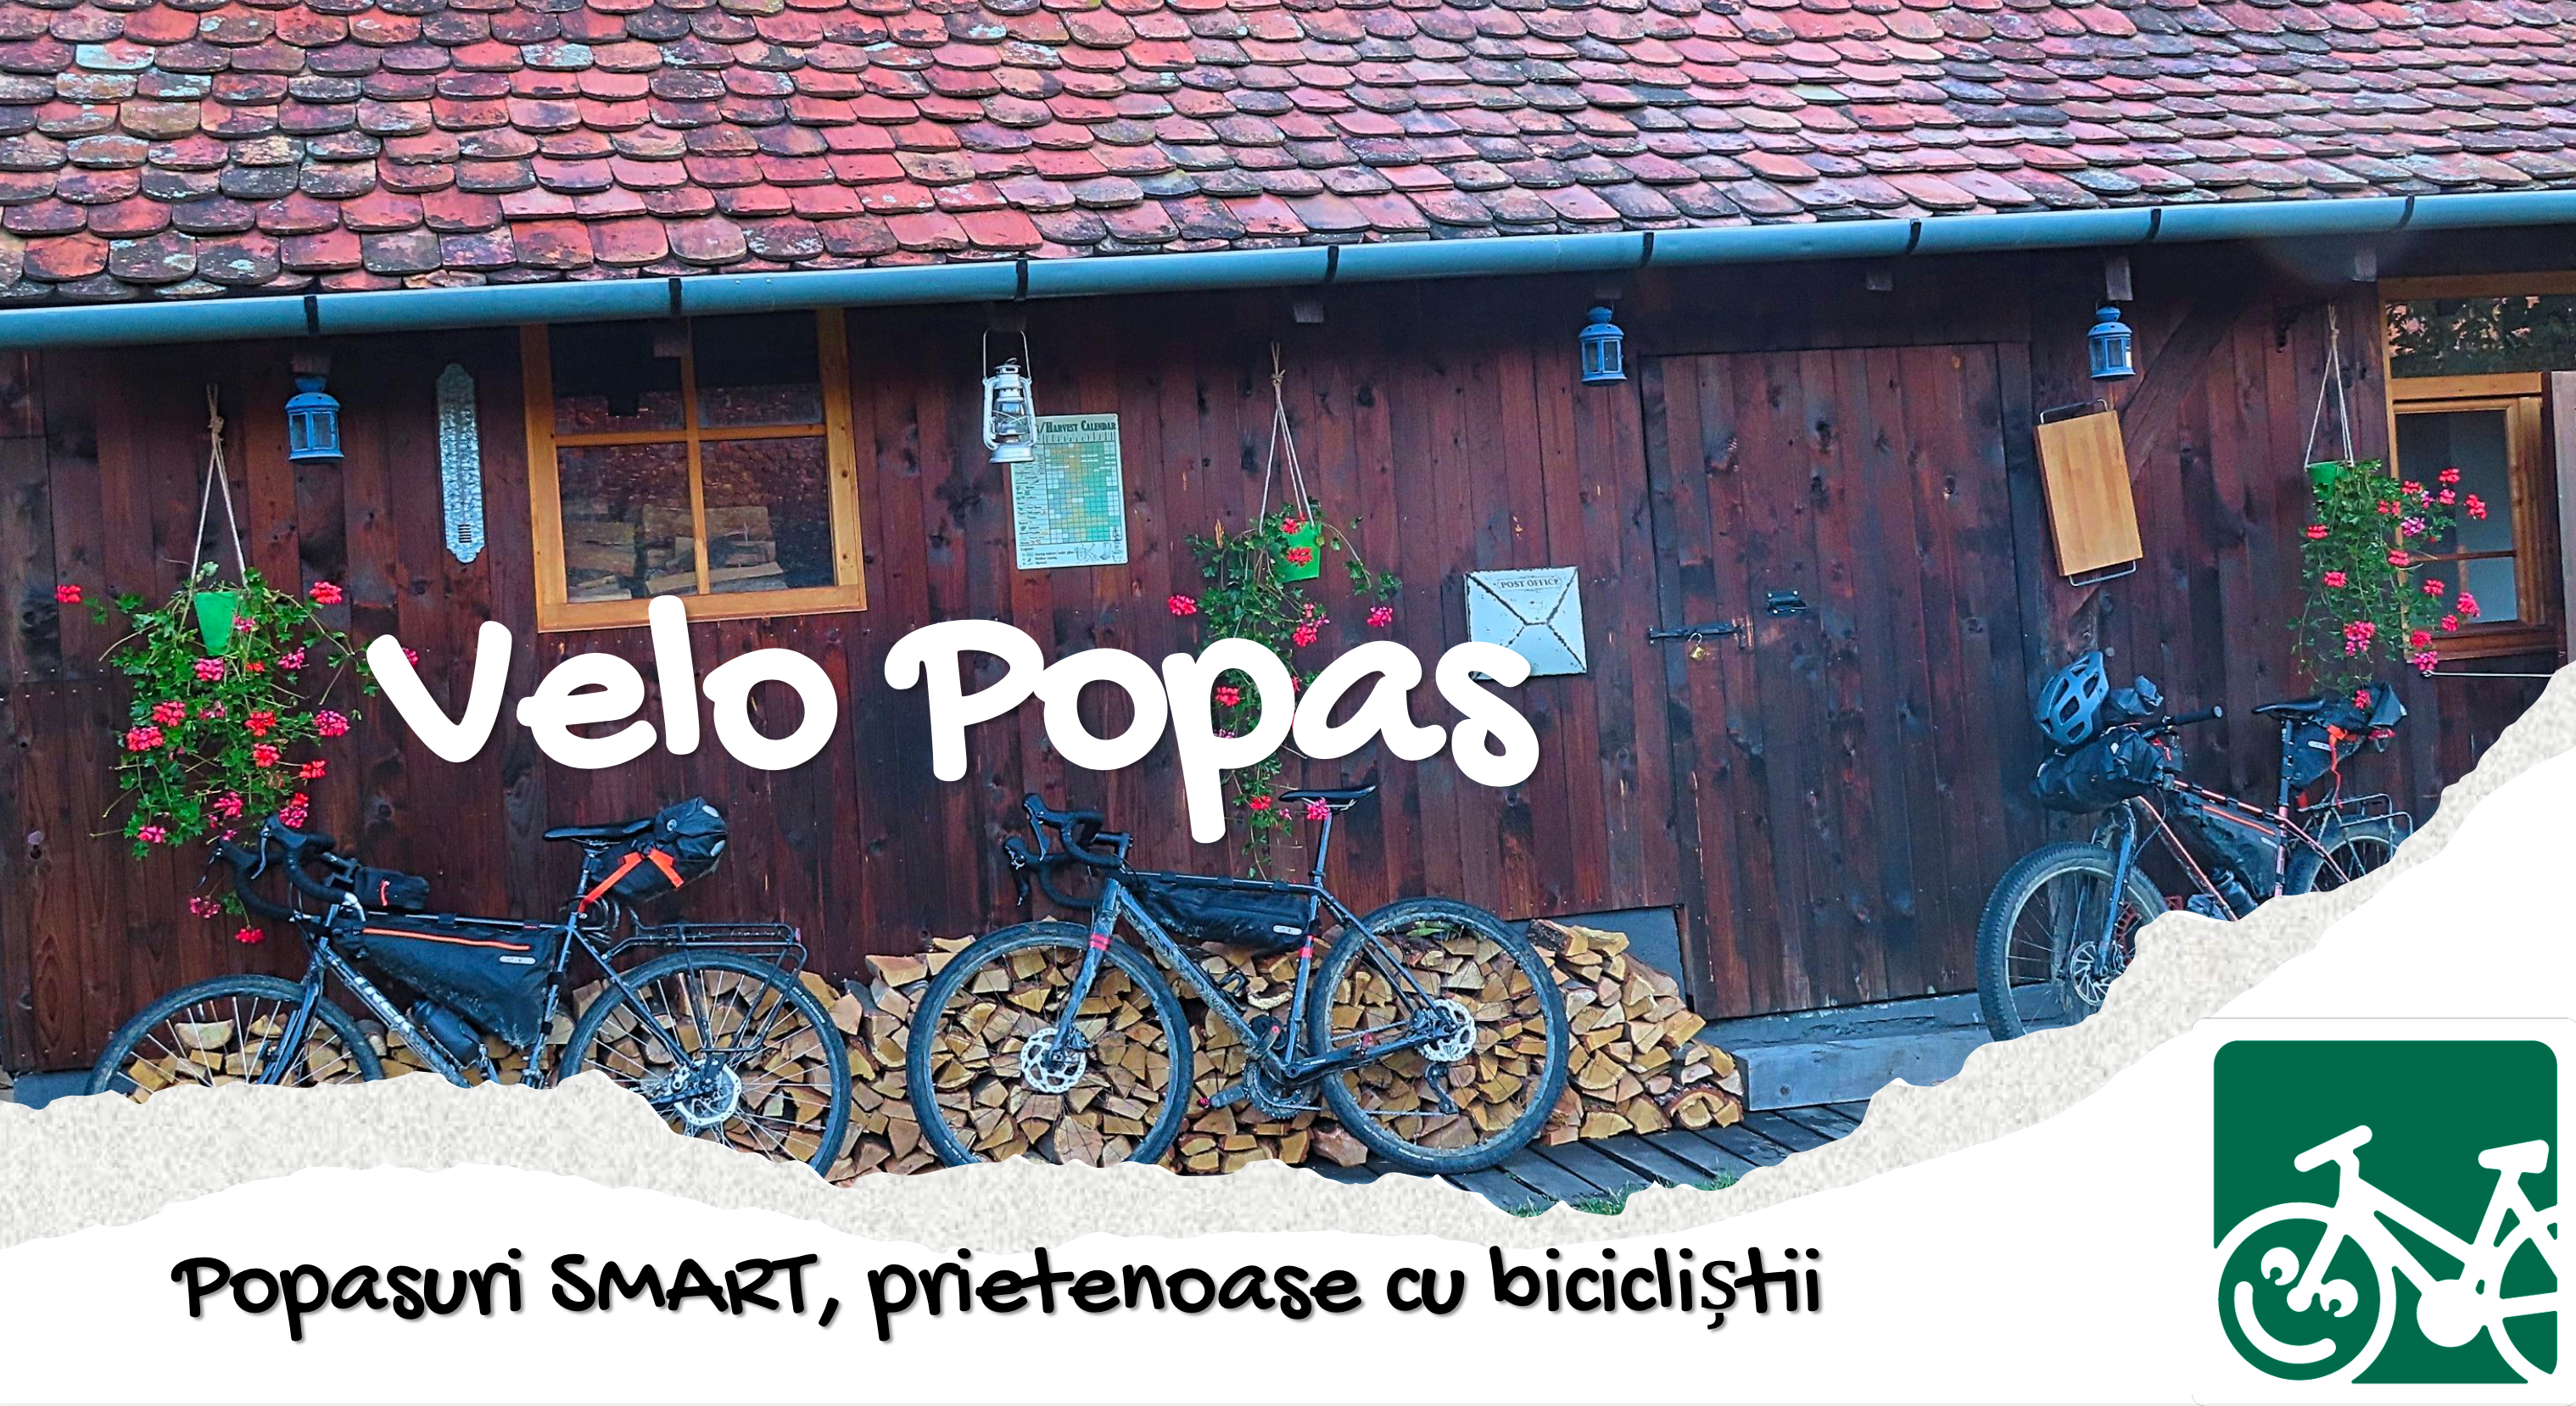 Velo Popas - the first cycling certification in Romania